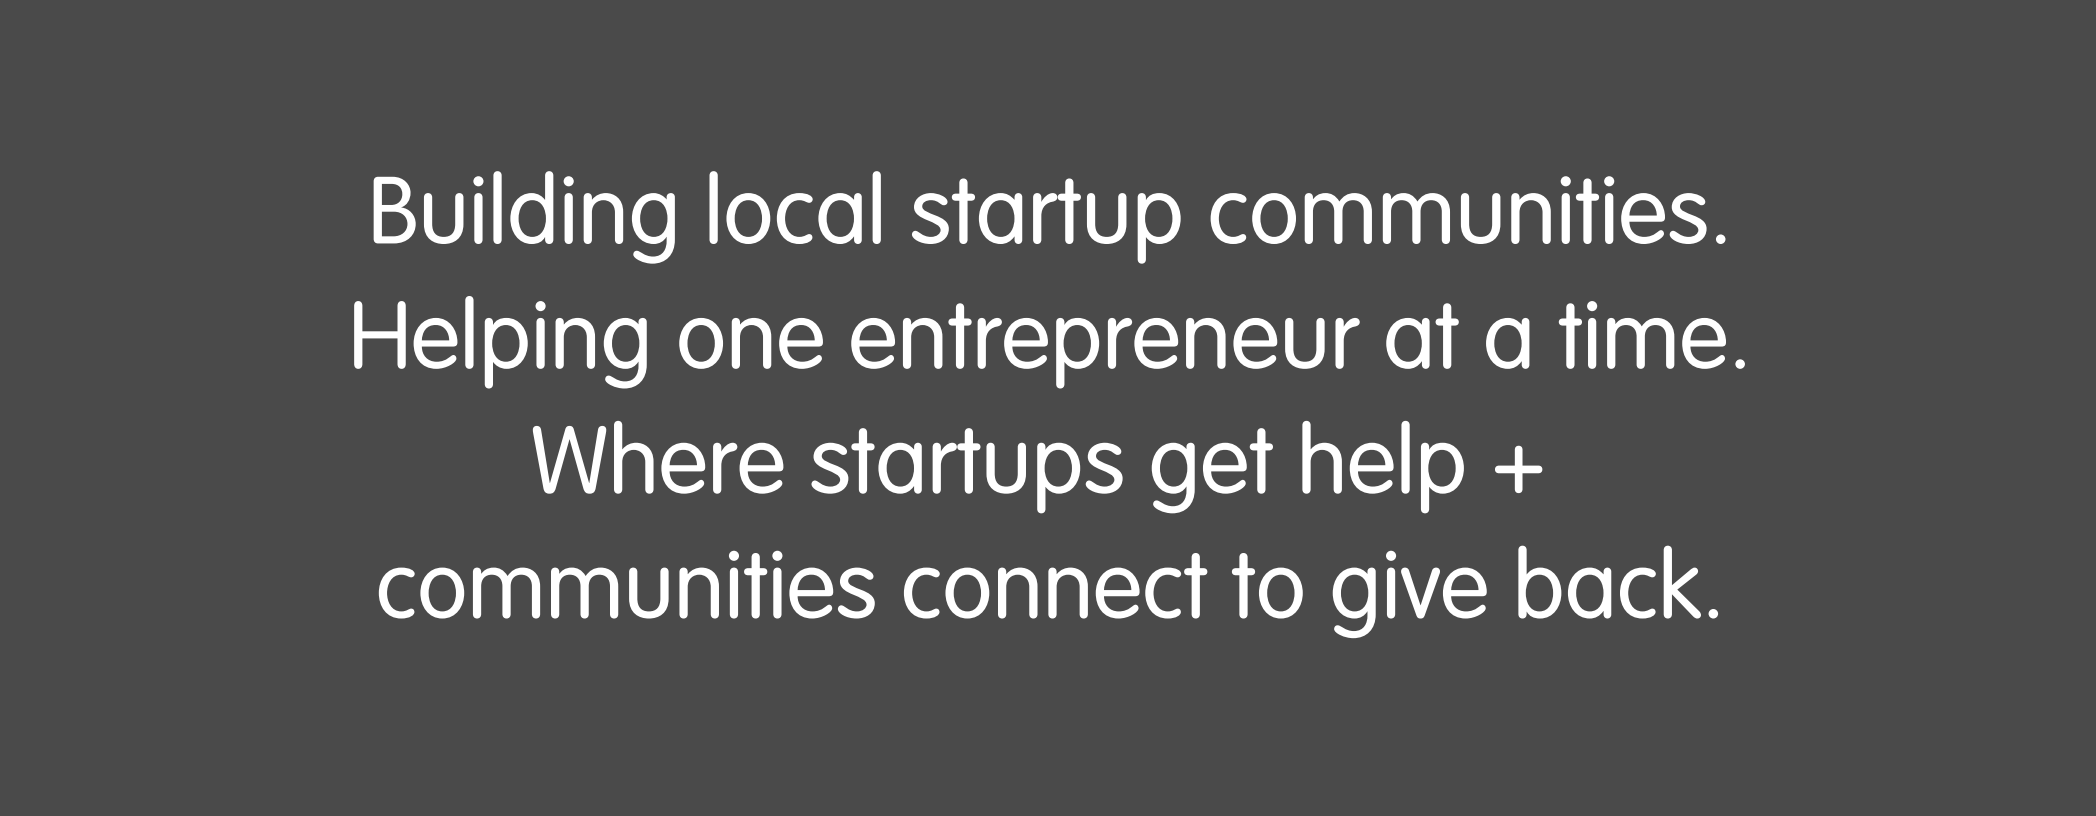 Building local startup communities. Helping one entrepreneur at a time. Where startups get help +  communities connect to give back.